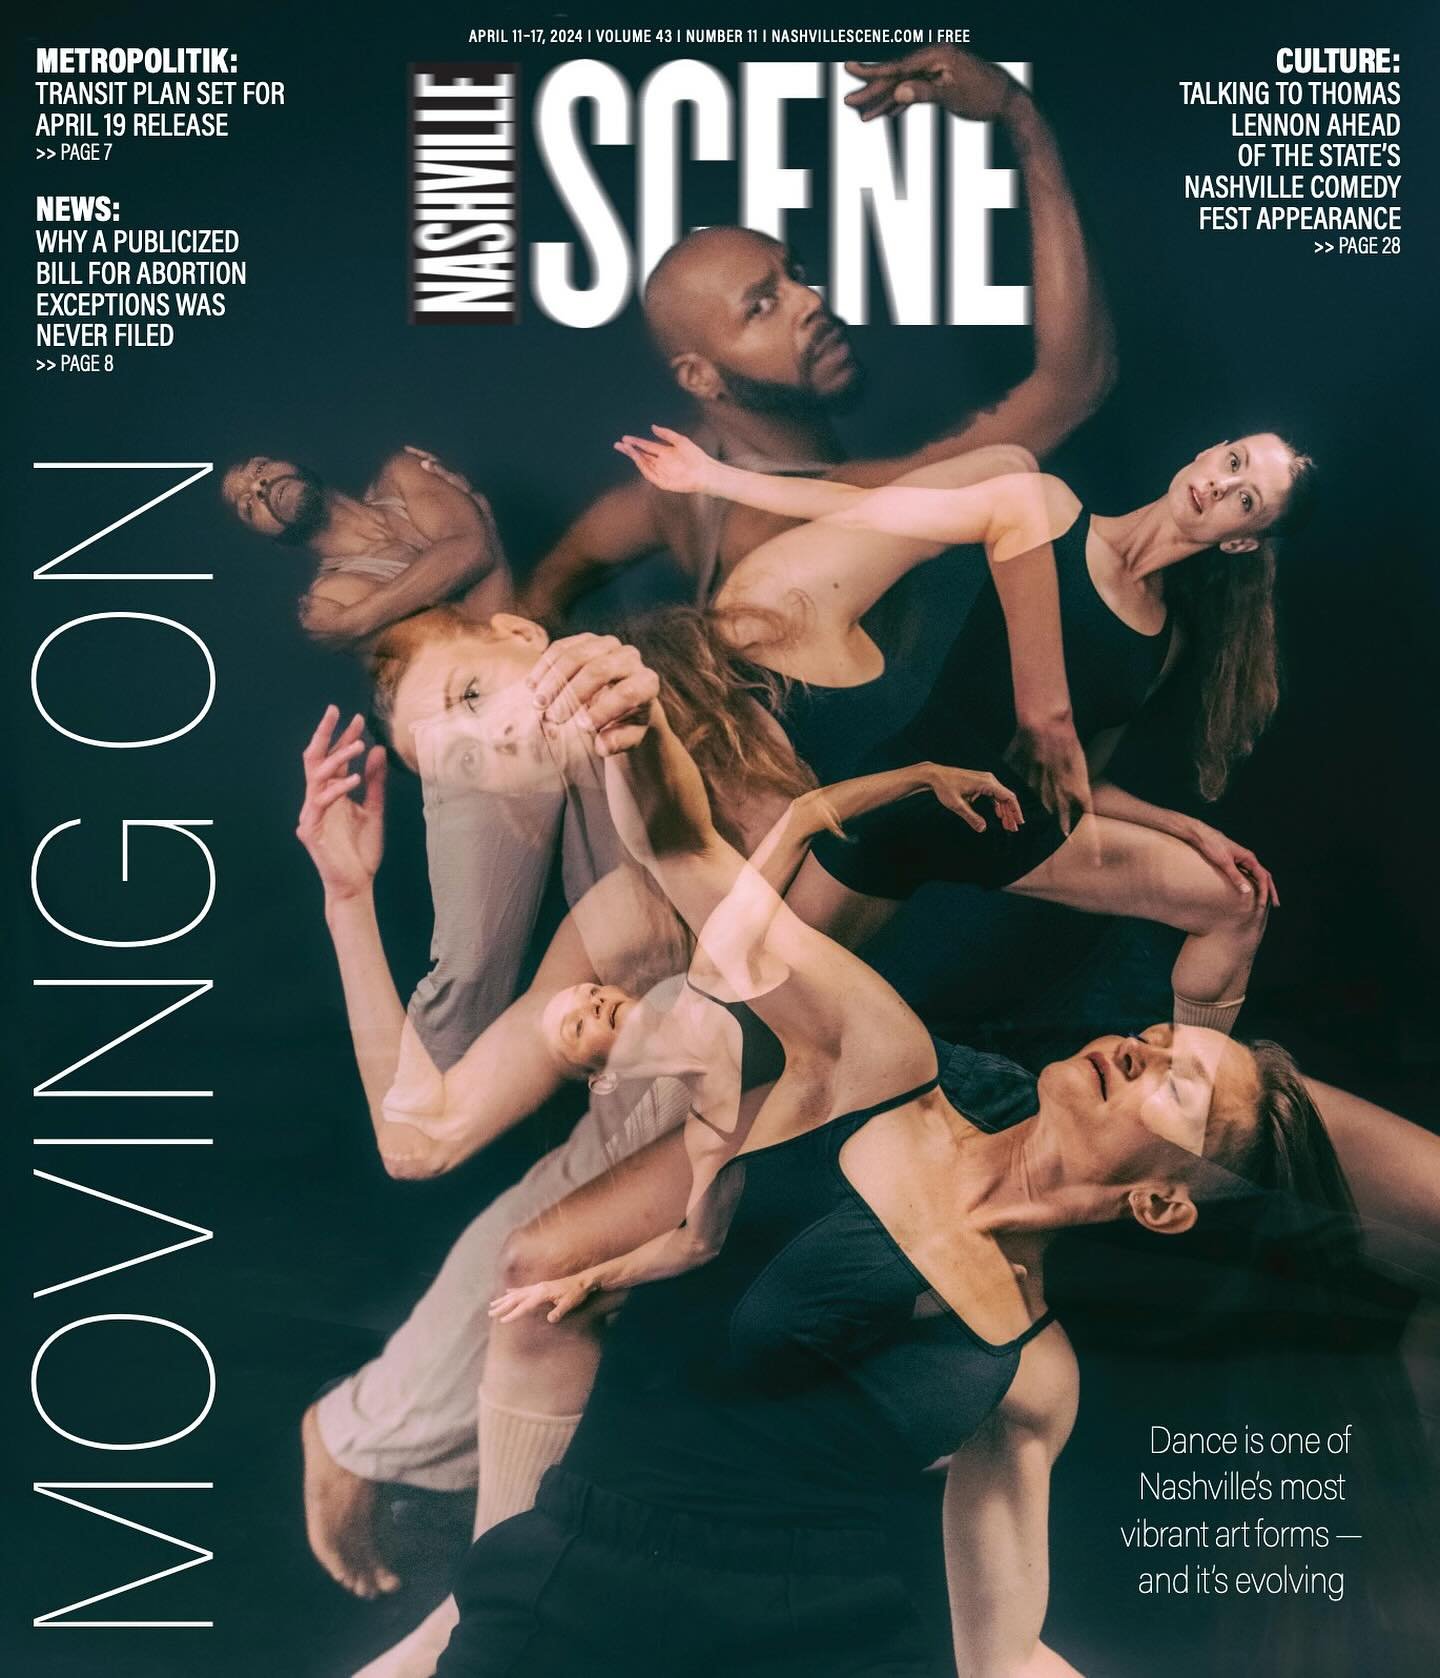 Dance in Nashville is for everyone!

&ldquo;If you&rsquo;re not having fun in dance class, what are we doing?&rdquo; - DancEast Collective&rsquo;s Lindsay Fine Smith had an opportunity to speak with the @nashvillescene about how dancers of all abilit